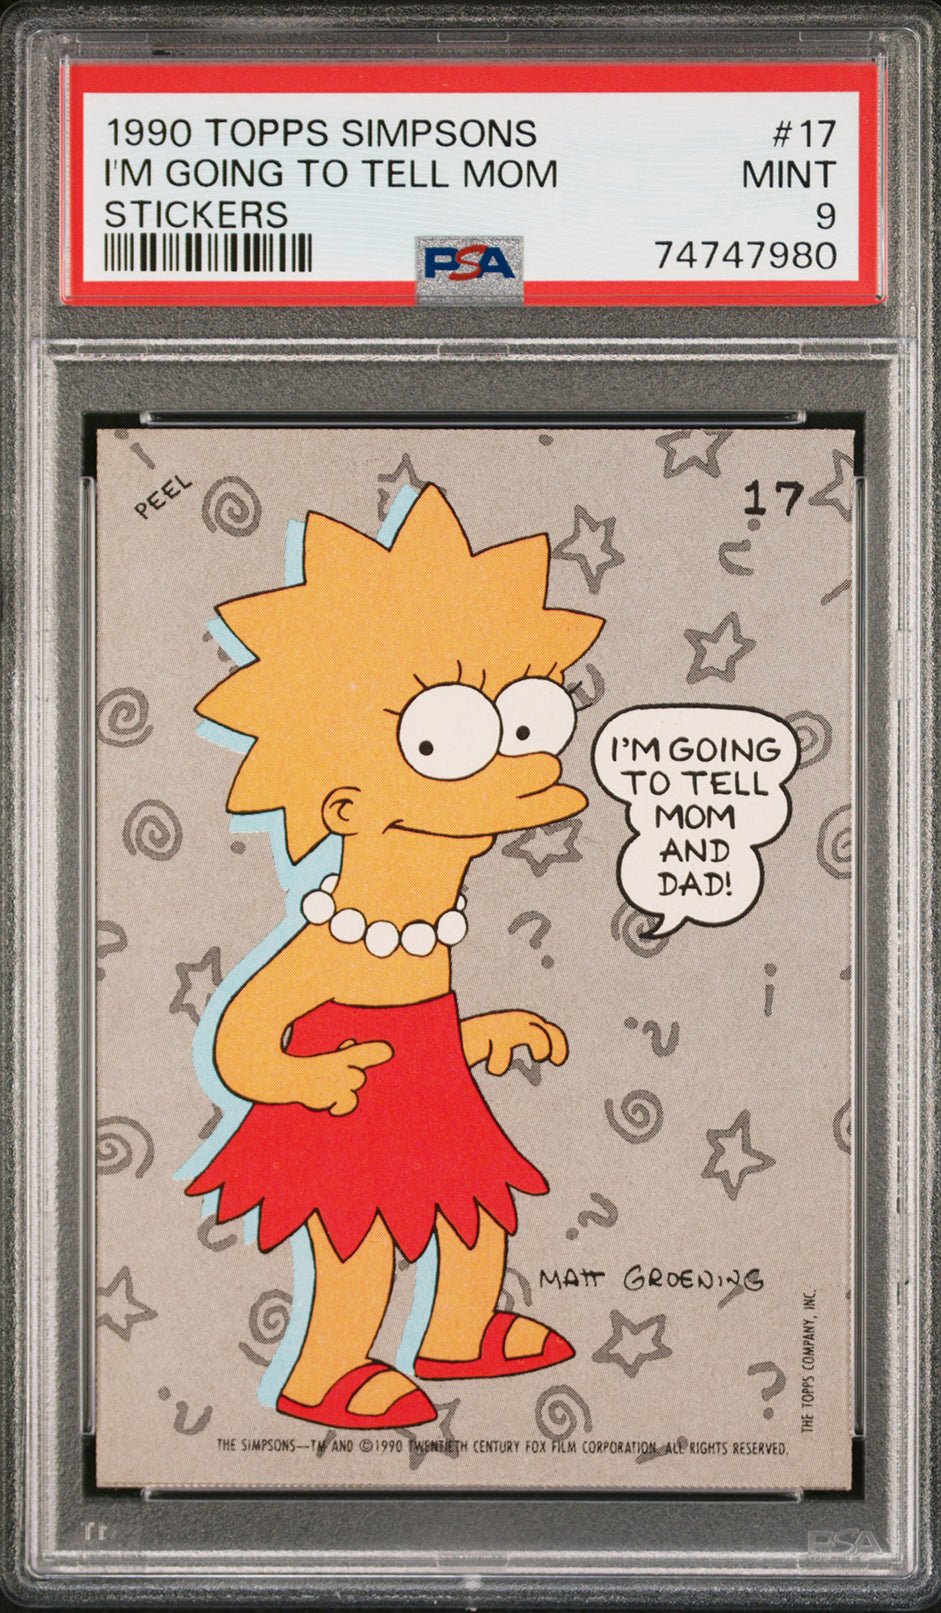 I'M GOING TO TELL MOM AND DAD! LISA Simpson PSA 9 1990 Topps The Simpsons Sticker #17 The Simpsons Graded Cards Sticker - Hobby Gems